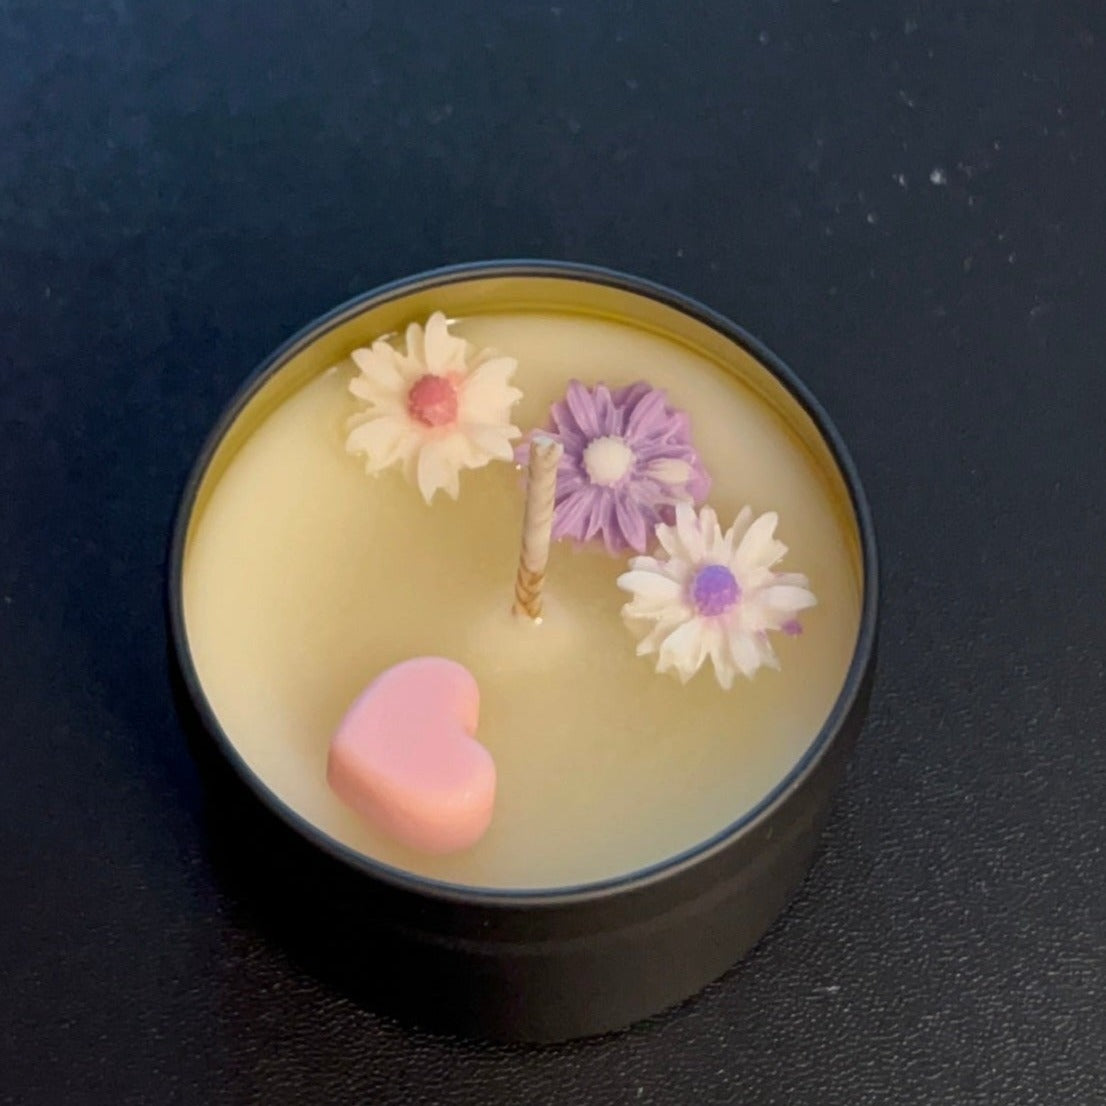 Candle Making Workshop "Soy Wax Candle with Embedded Designs" with Sofija in Berlin, Germany by subcultours